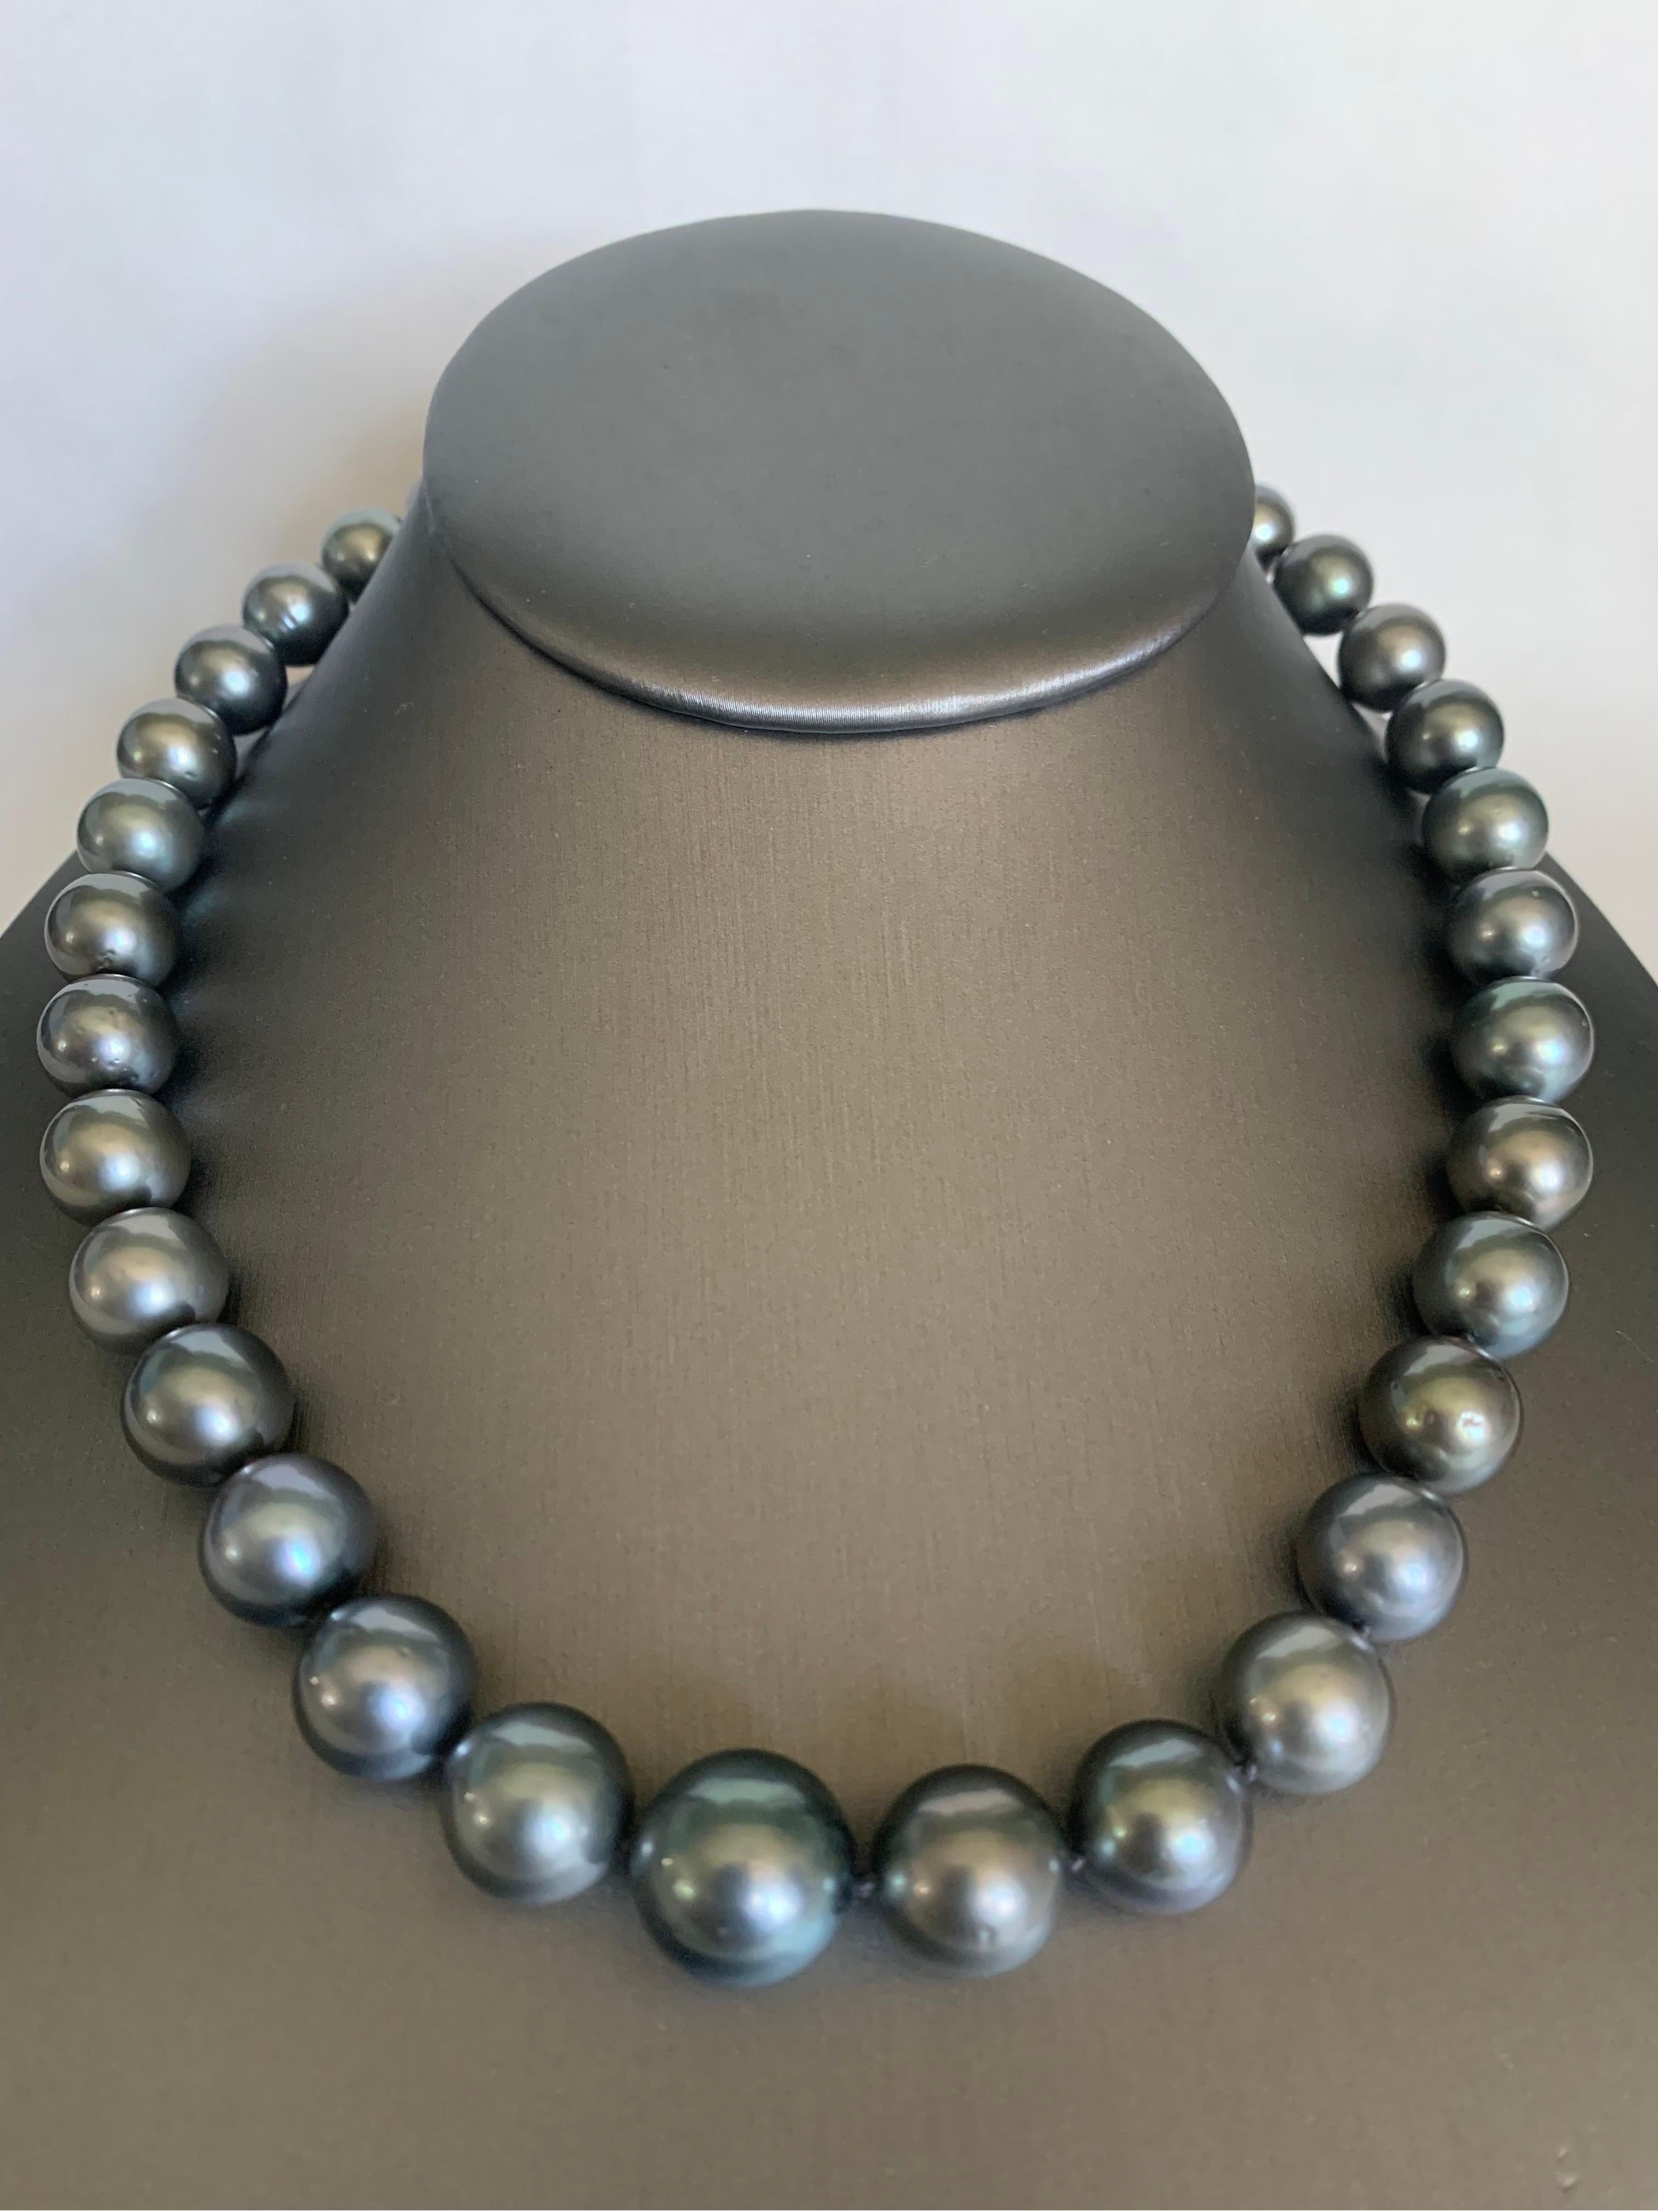 Elevate your look with a timeless graduated pearl necklace. This 17-18 inches long strand necklace is fully knotted and hand strung with matching silk cord. The necklace comprises 35 lustrous Tahitian pearls measuring 10-13.5mm and closure is 14K